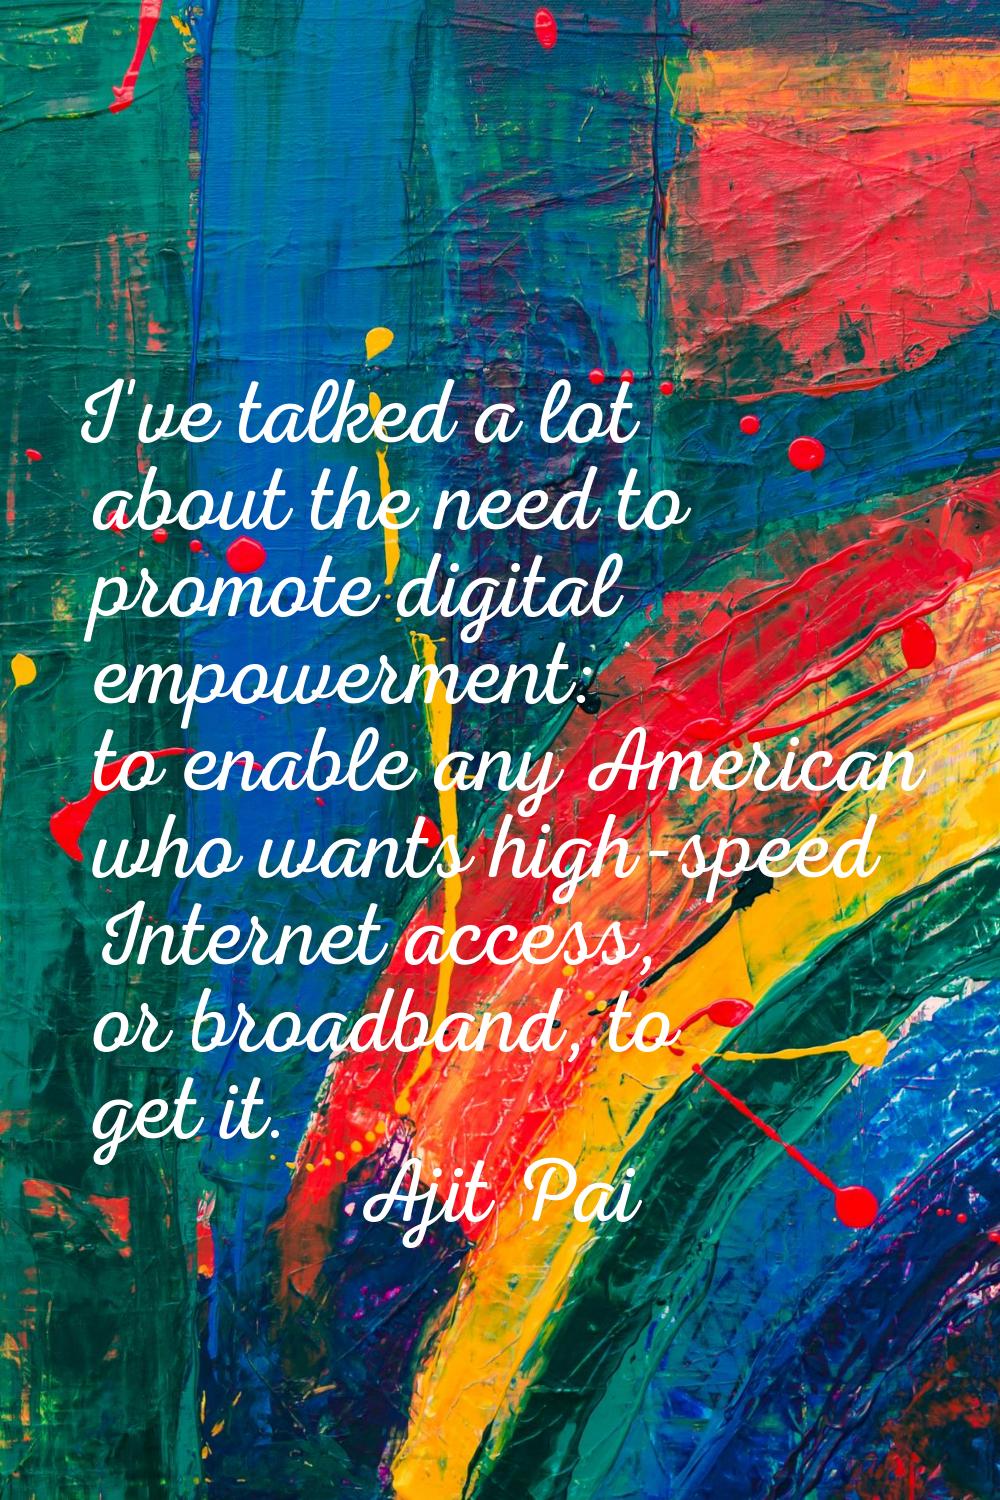 I've talked a lot about the need to promote digital empowerment: to enable any American who wants h